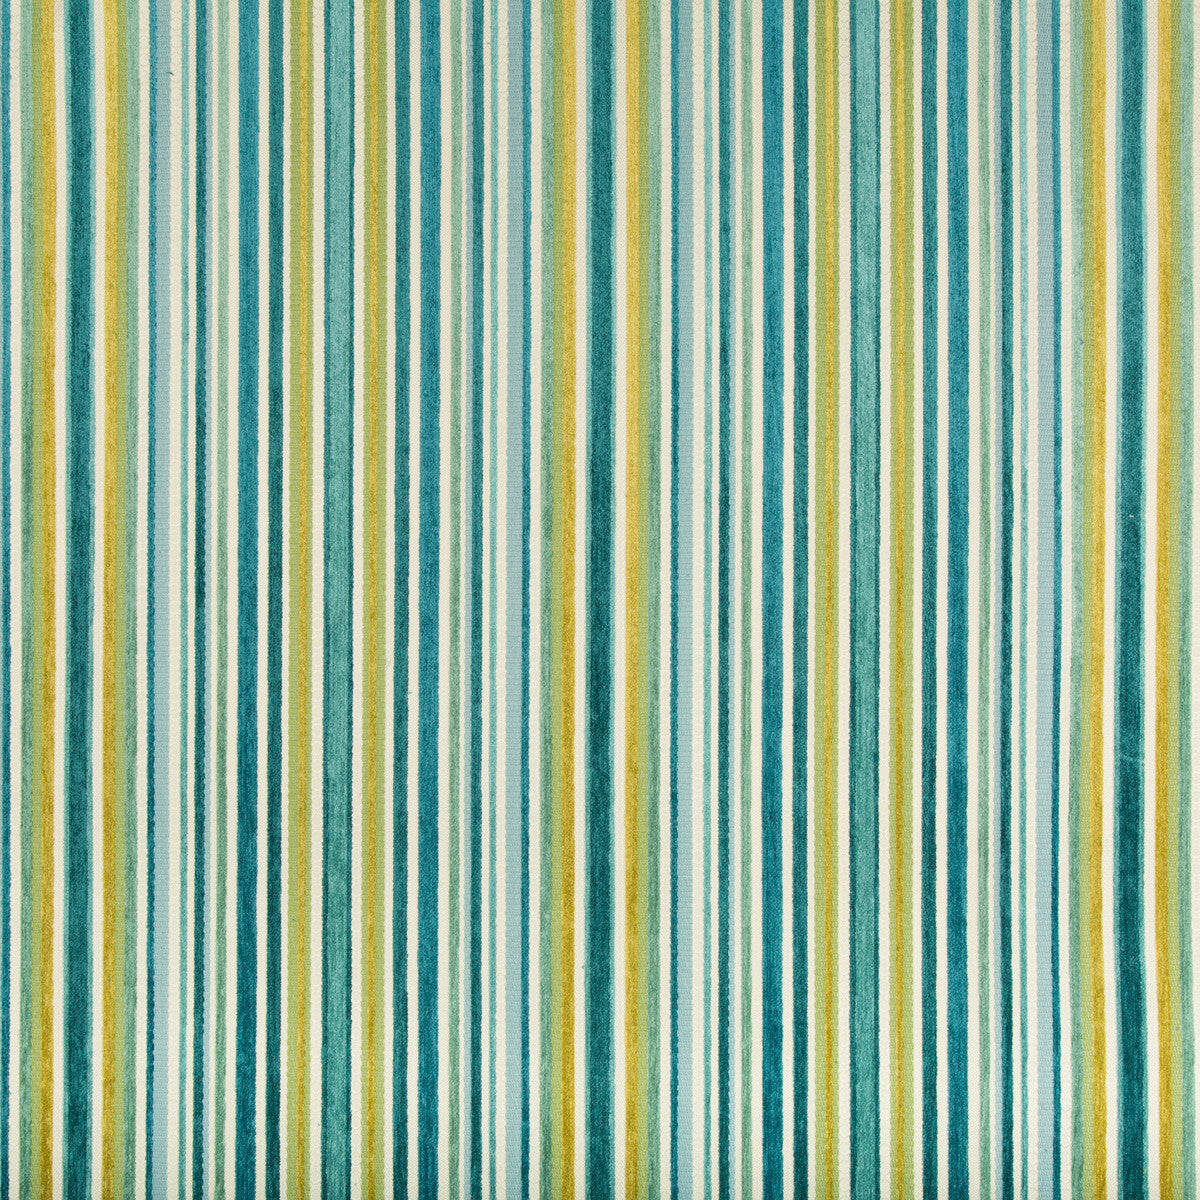 Kravet Design fabric in 34973-523 color - pattern 34973.523.0 - by Kravet Design in the Performance Crypton Home collection